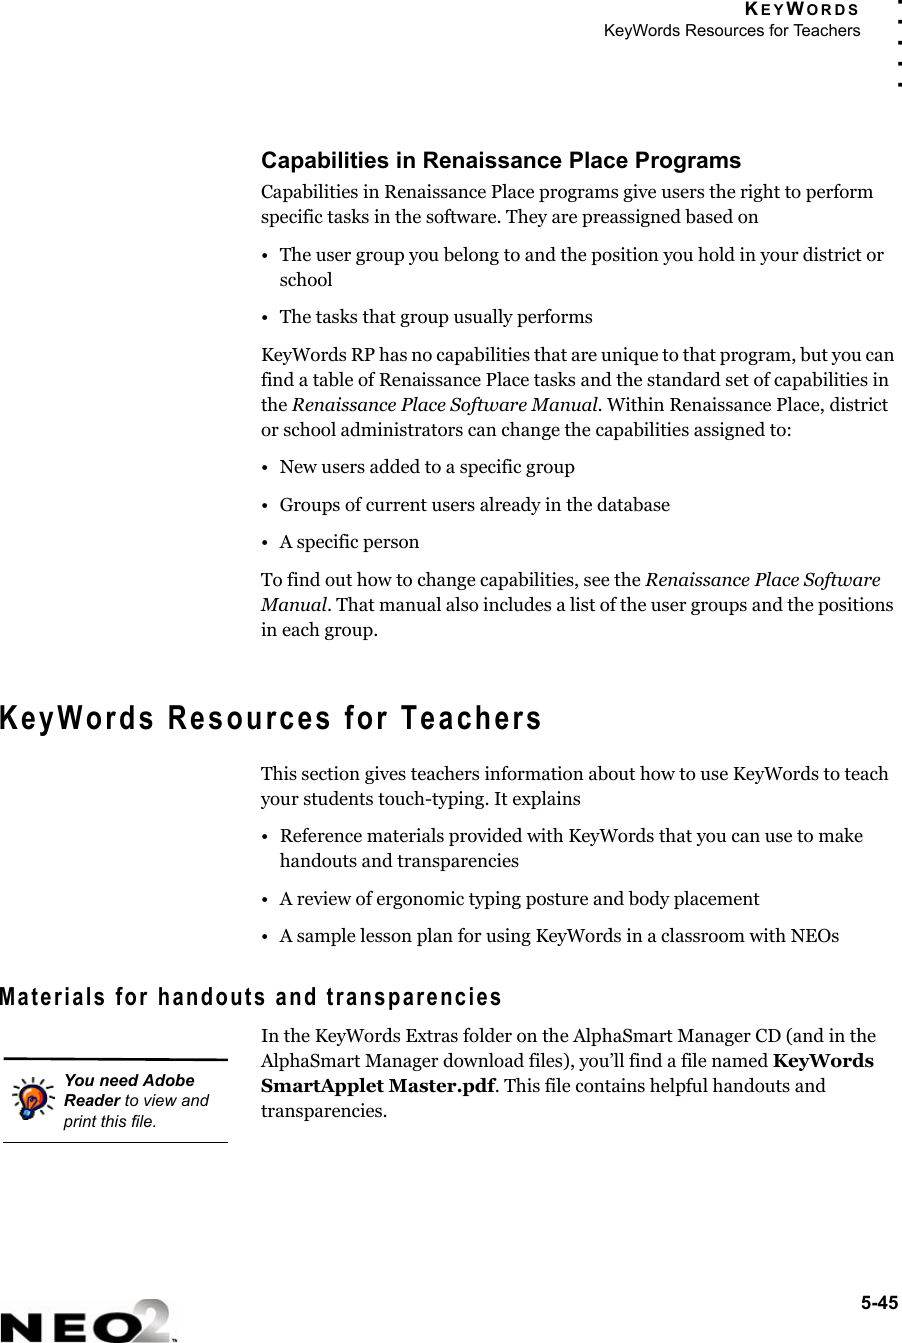 KEYWORDSKeyWords Resources for Teachers5-45. . . . .Capabilities in Renaissance Place ProgramsCapabilities in Renaissance Place programs give users the right to perform specific tasks in the software. They are preassigned based on• The user group you belong to and the position you hold in your district or school• The tasks that group usually performsKeyWords RP has no capabilities that are unique to that program, but you can find a table of Renaissance Place tasks and the standard set of capabilities in the Renaissance Place Software Manual. Within Renaissance Place, district or school administrators can change the capabilities assigned to:• New users added to a specific group• Groups of current users already in the database• A specific personTo find out how to change capabilities, see the Renaissance Place Software Manual. That manual also includes a list of the user groups and the positions in each group.KeyWords Resources for TeachersThis section gives teachers information about how to use KeyWords to teach your students touch-typing. It explains• Reference materials provided with KeyWords that you can use to make handouts and transparencies• A review of ergonomic typing posture and body placement• A sample lesson plan for using KeyWords in a classroom with NEOsMaterials for handouts and transparenciesIn the KeyWords Extras folder on the AlphaSmart Manager CD (and in the AlphaSmart Manager download files), you’ll find a file named KeyWords SmartApplet Master.pdf. This file contains helpful handouts and transparencies. You need Adobe Reader to view and print this file.